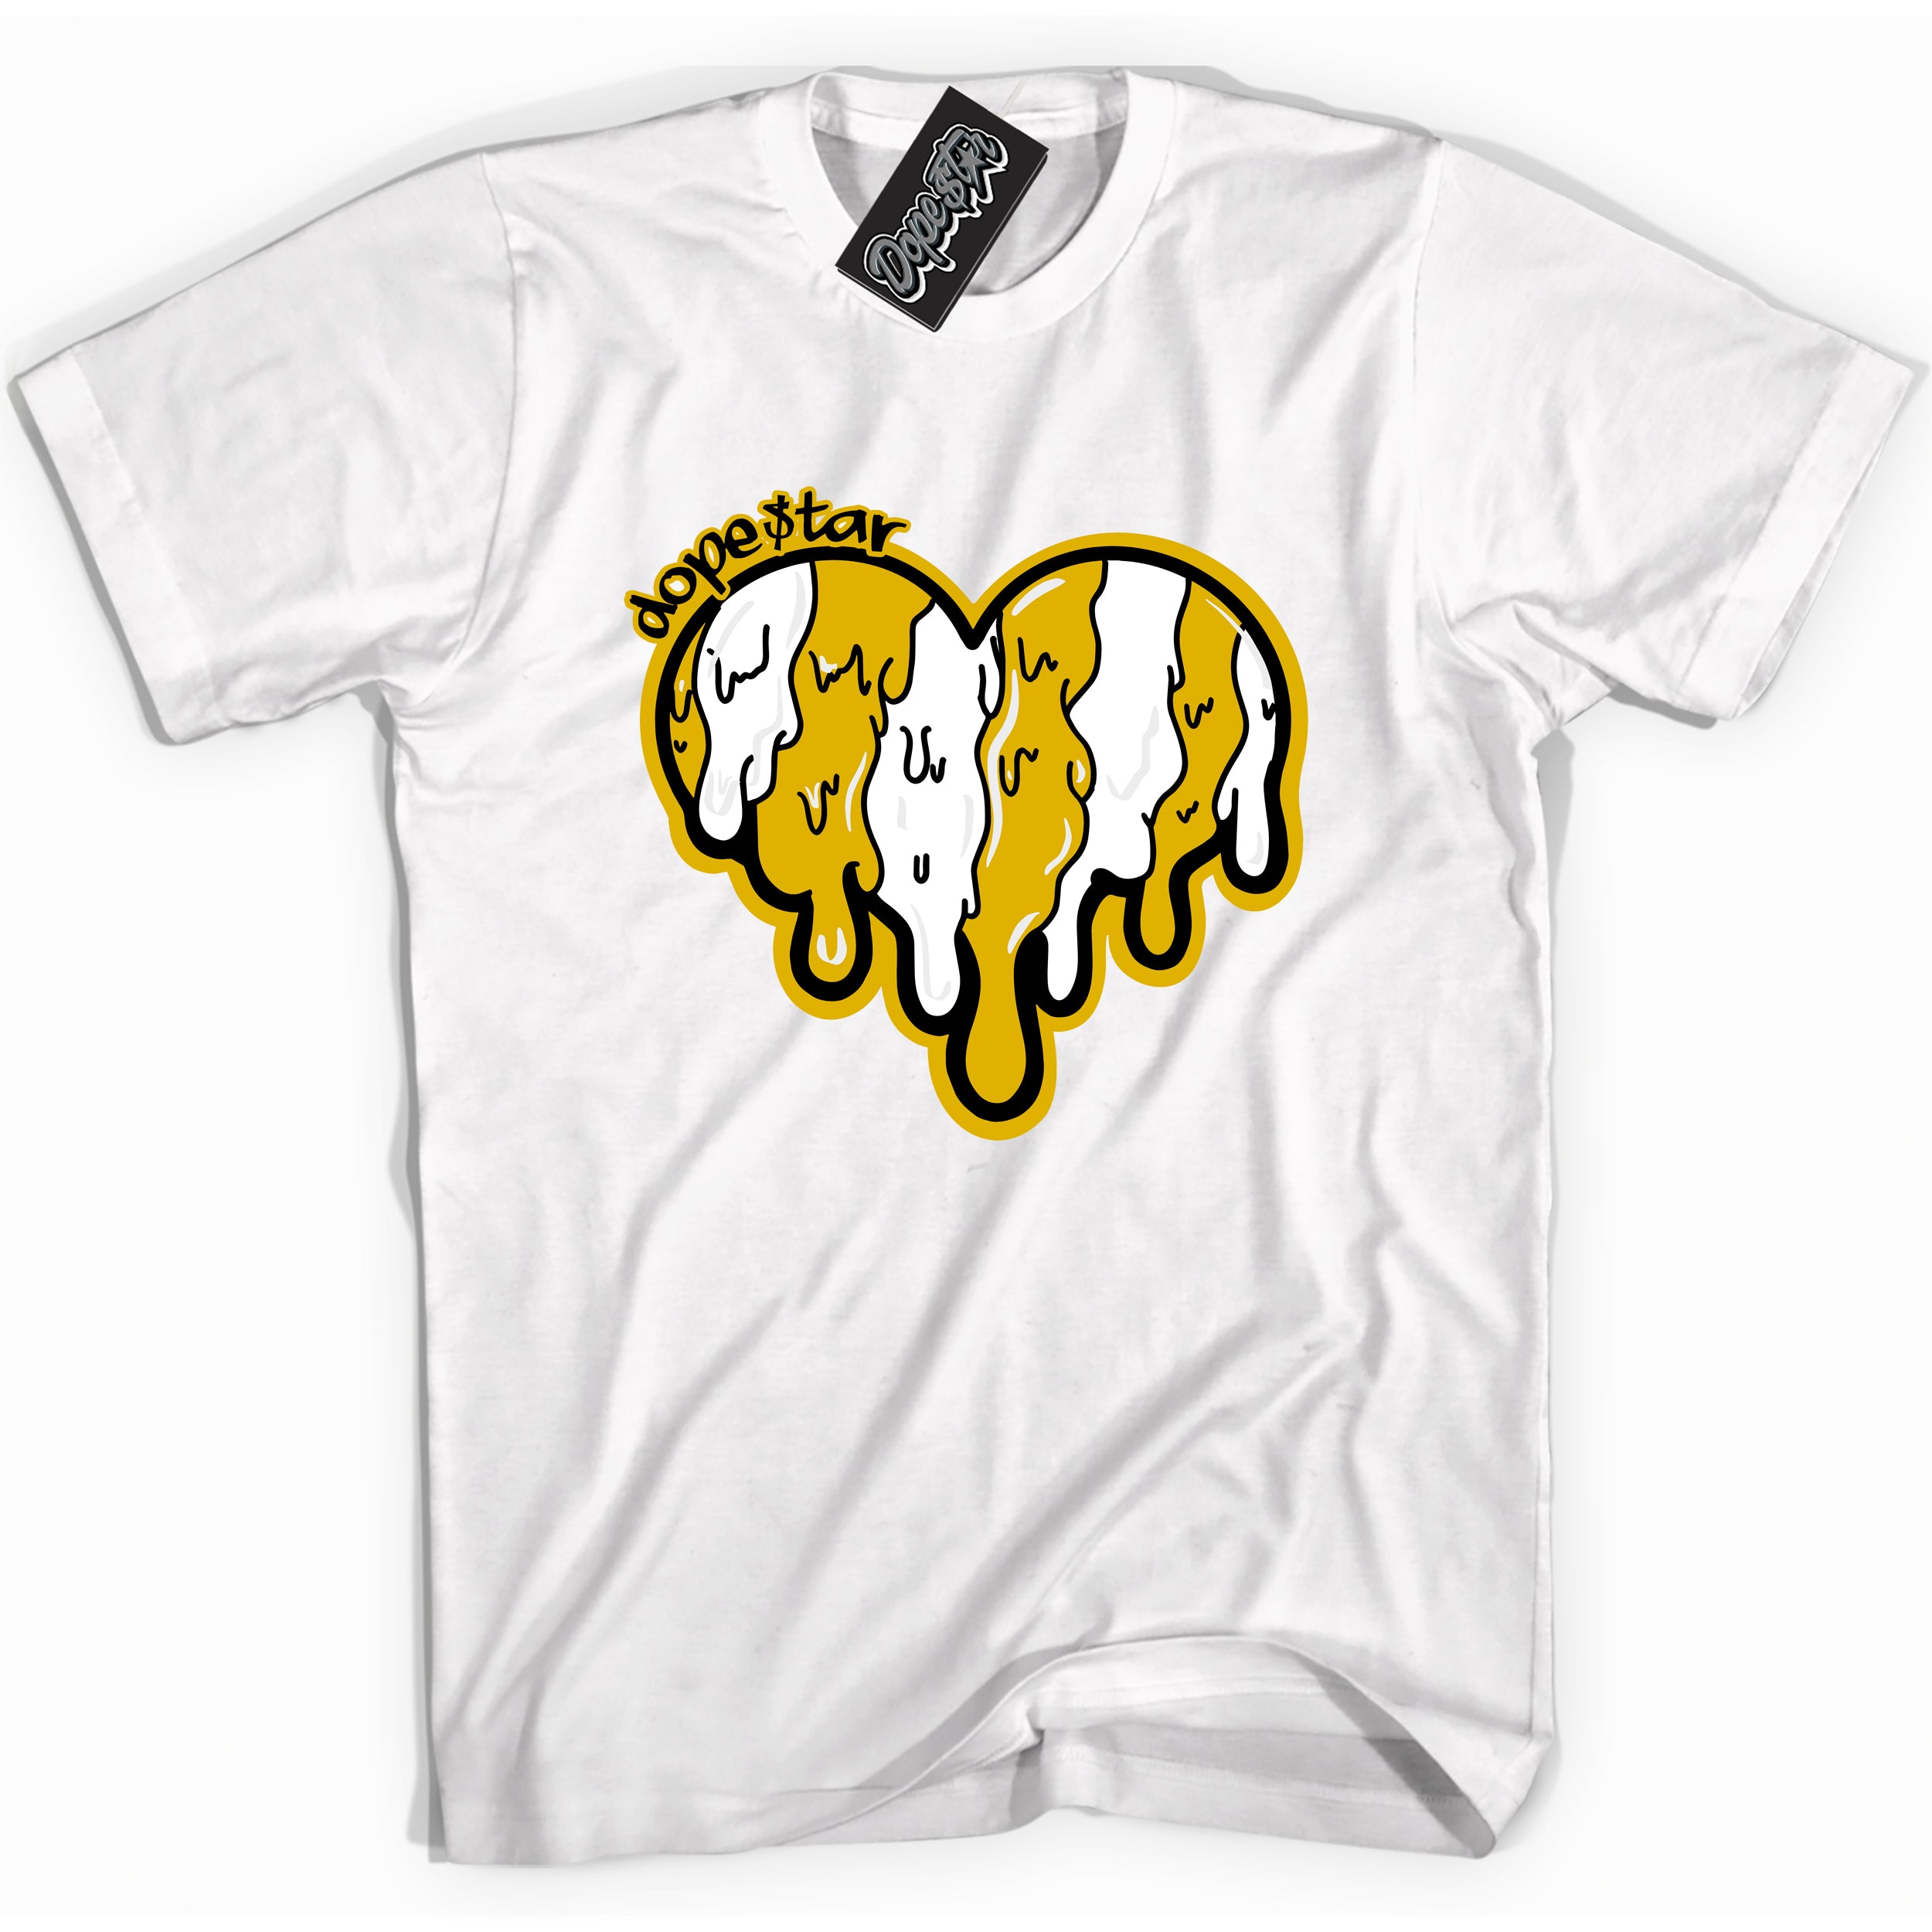 Cool White Shirt with “ Melting Heart” design that perfectly matches Yellow Ochre 6s Sneakers.